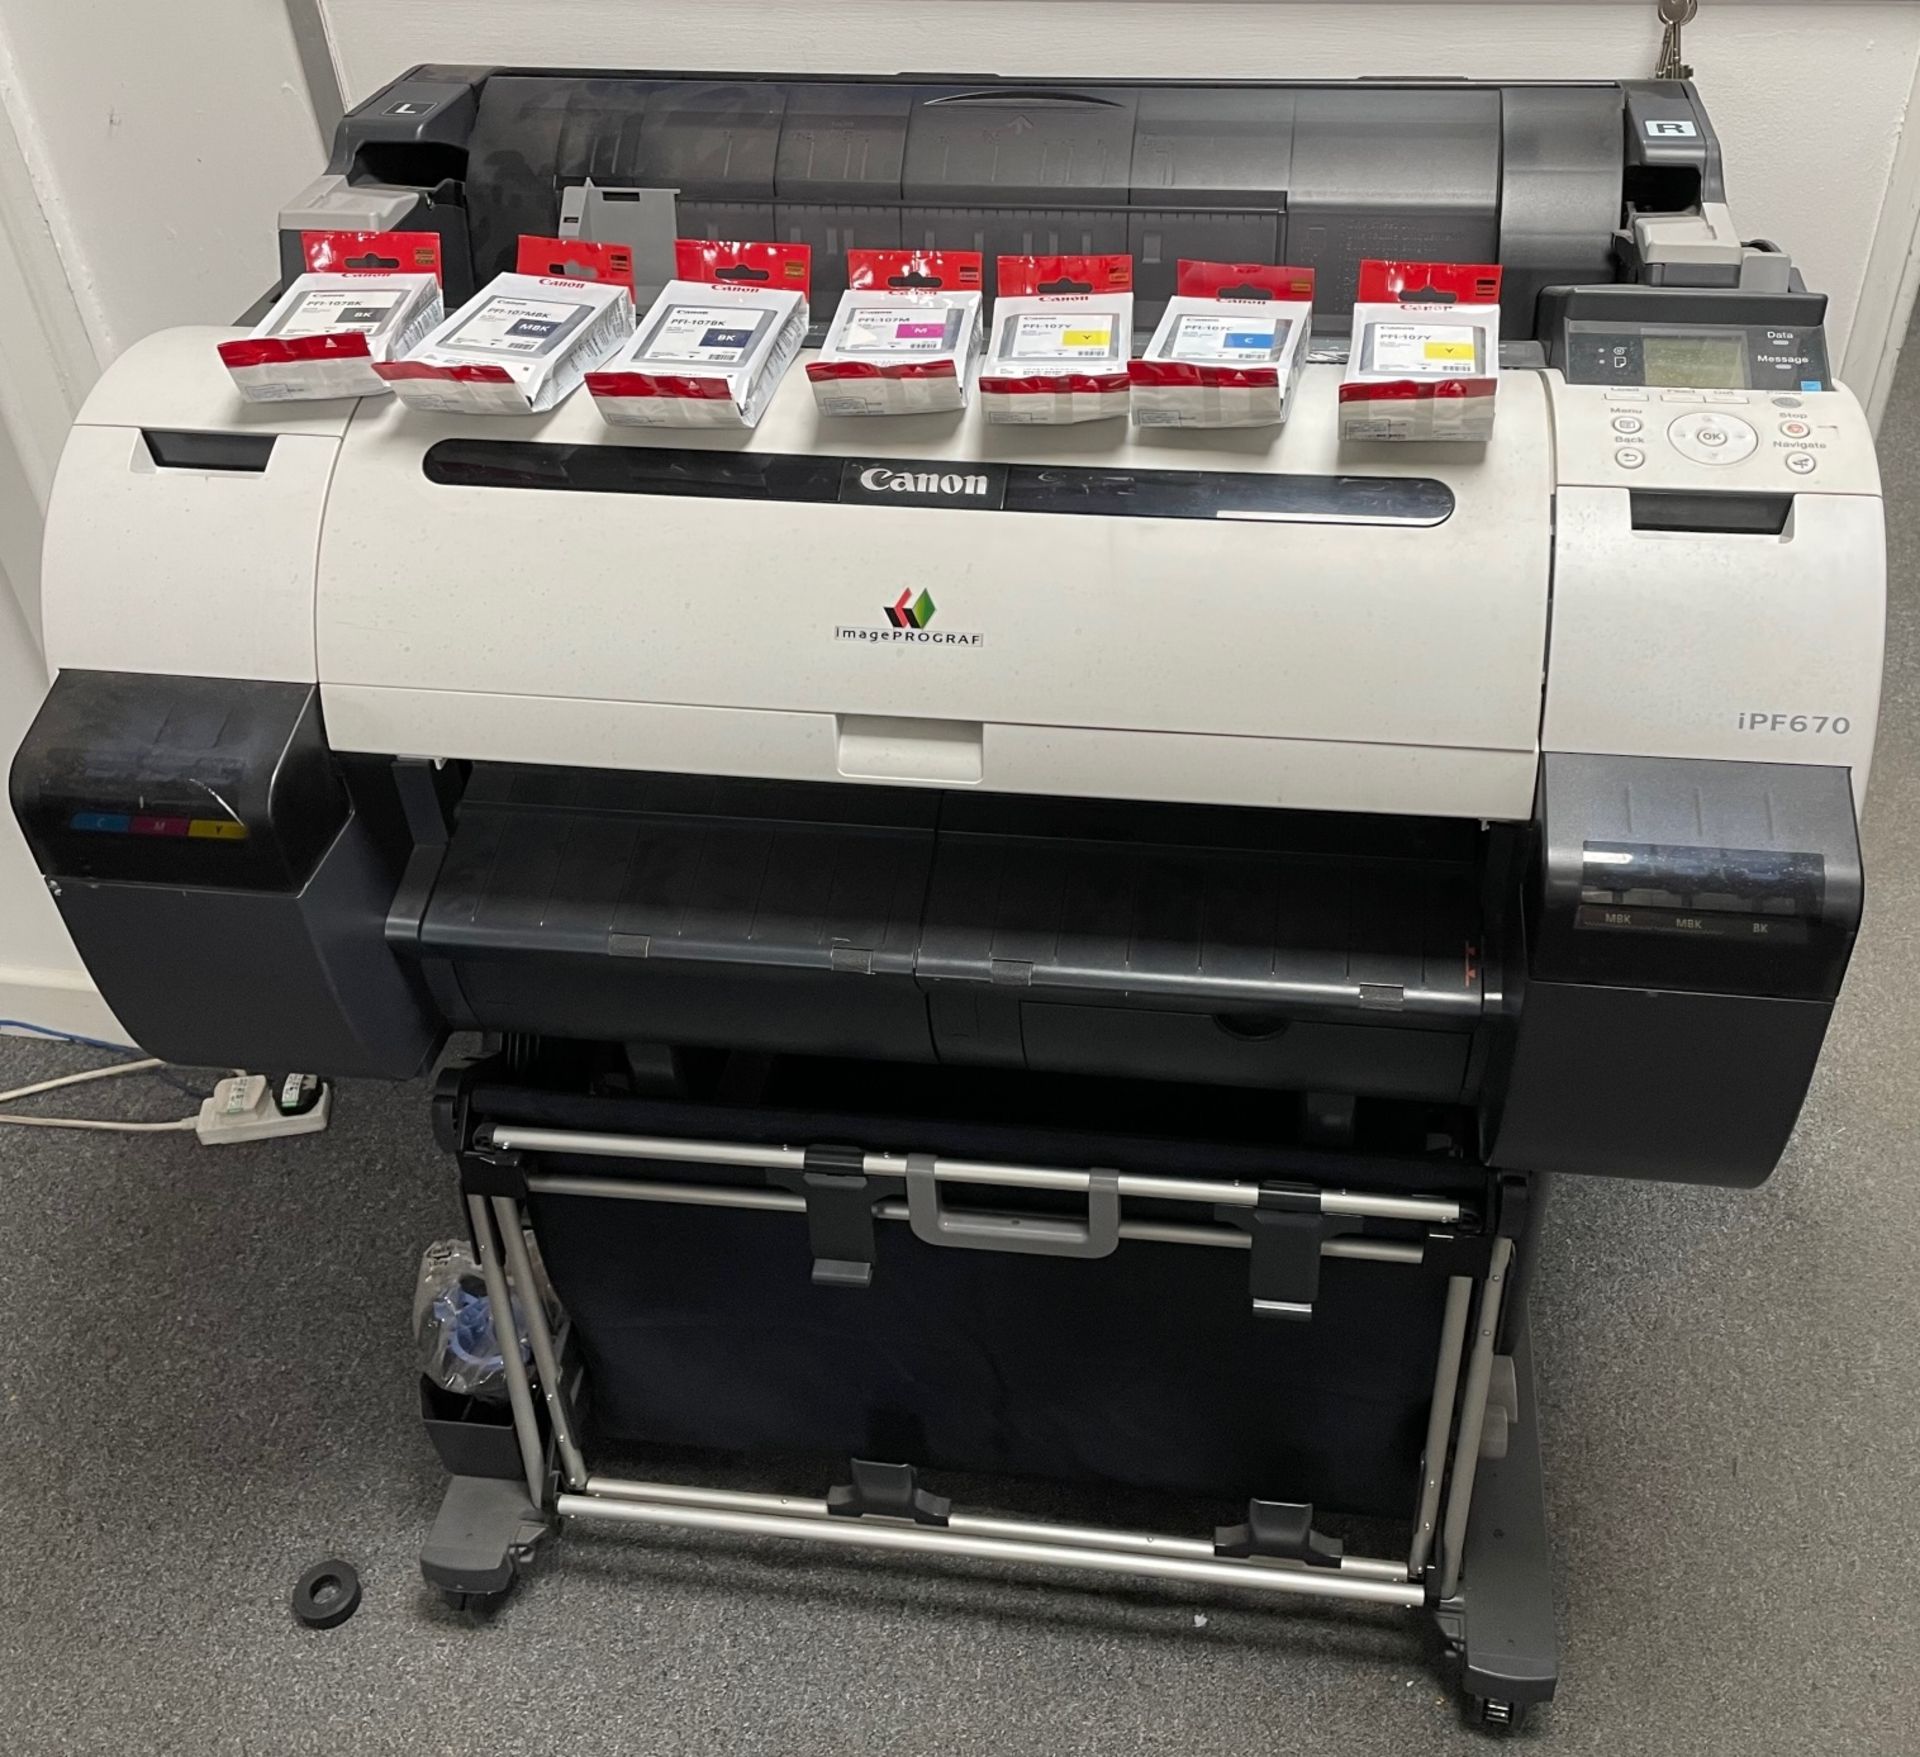 Canon Image Prograf IPF670 Wide Format Printer & 9 Various Inks To Suit (Location: Stockport. Please